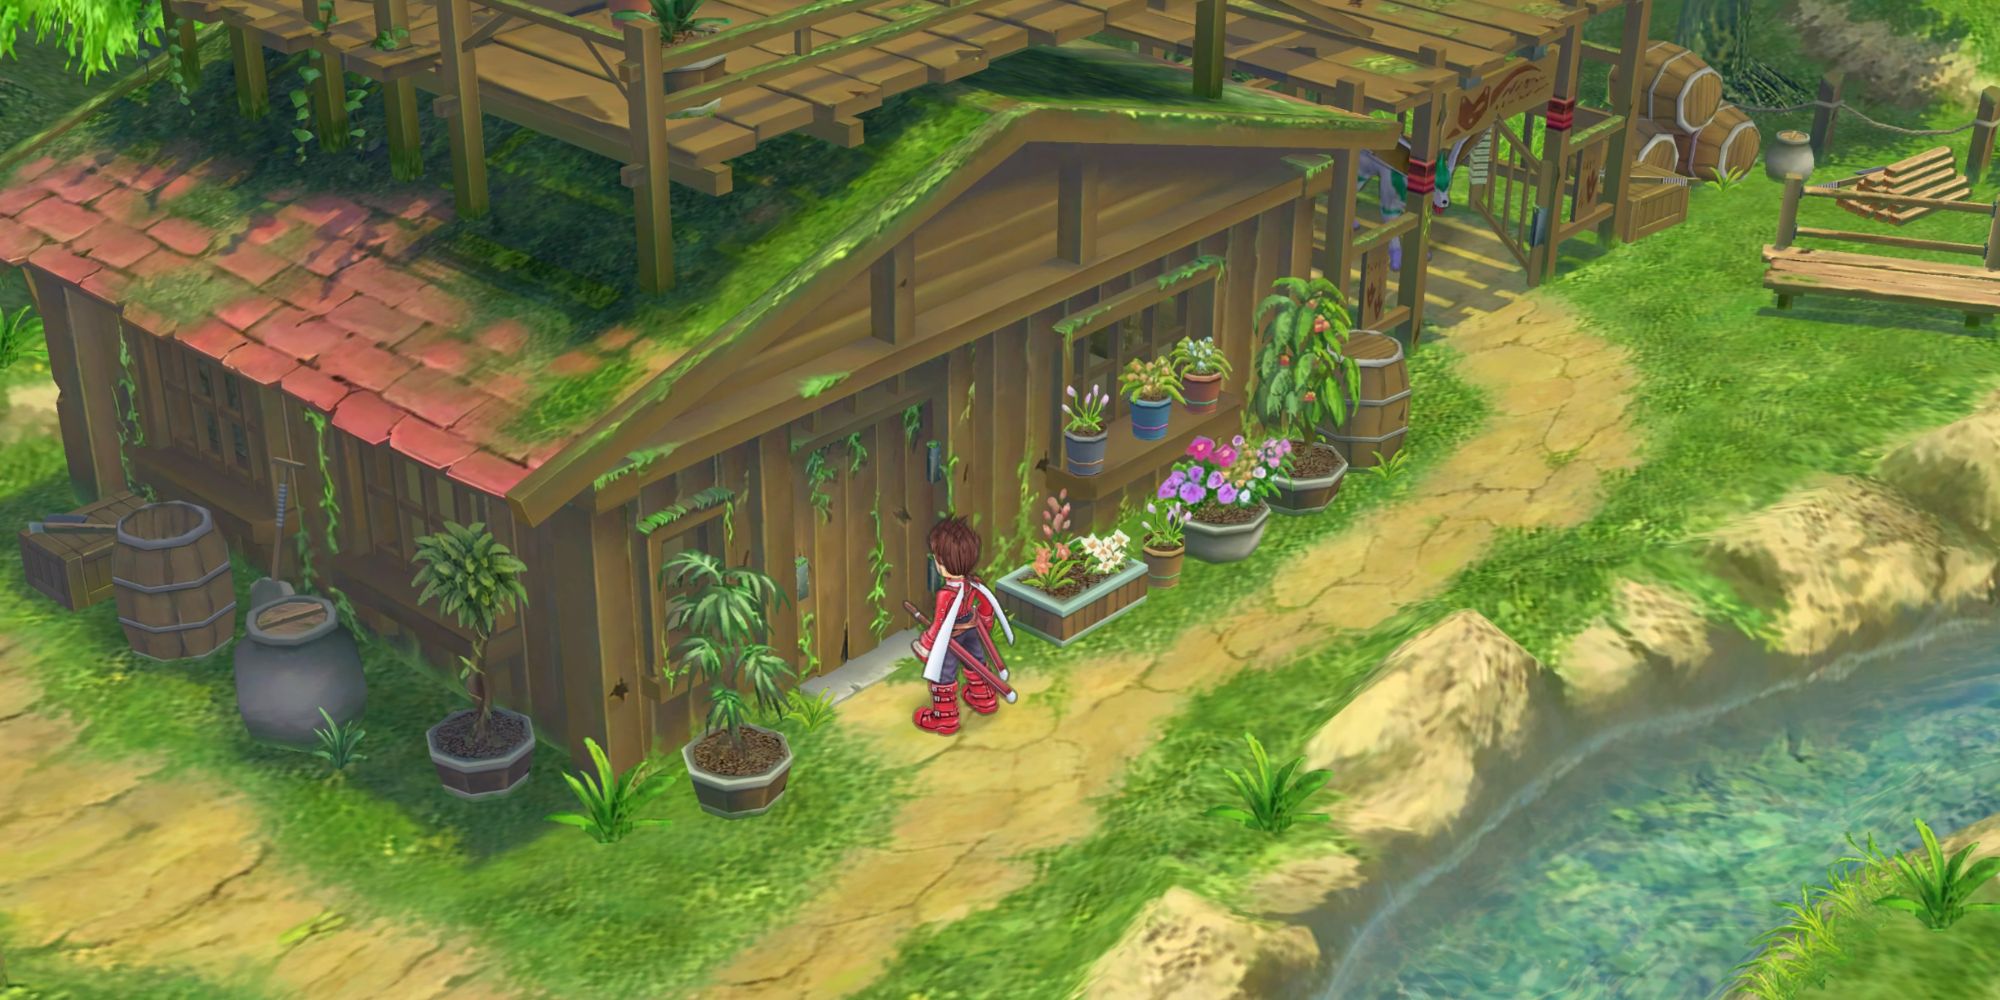 Lloyd approaching the door to Dirk's House in Tales of Symphonia Remastered